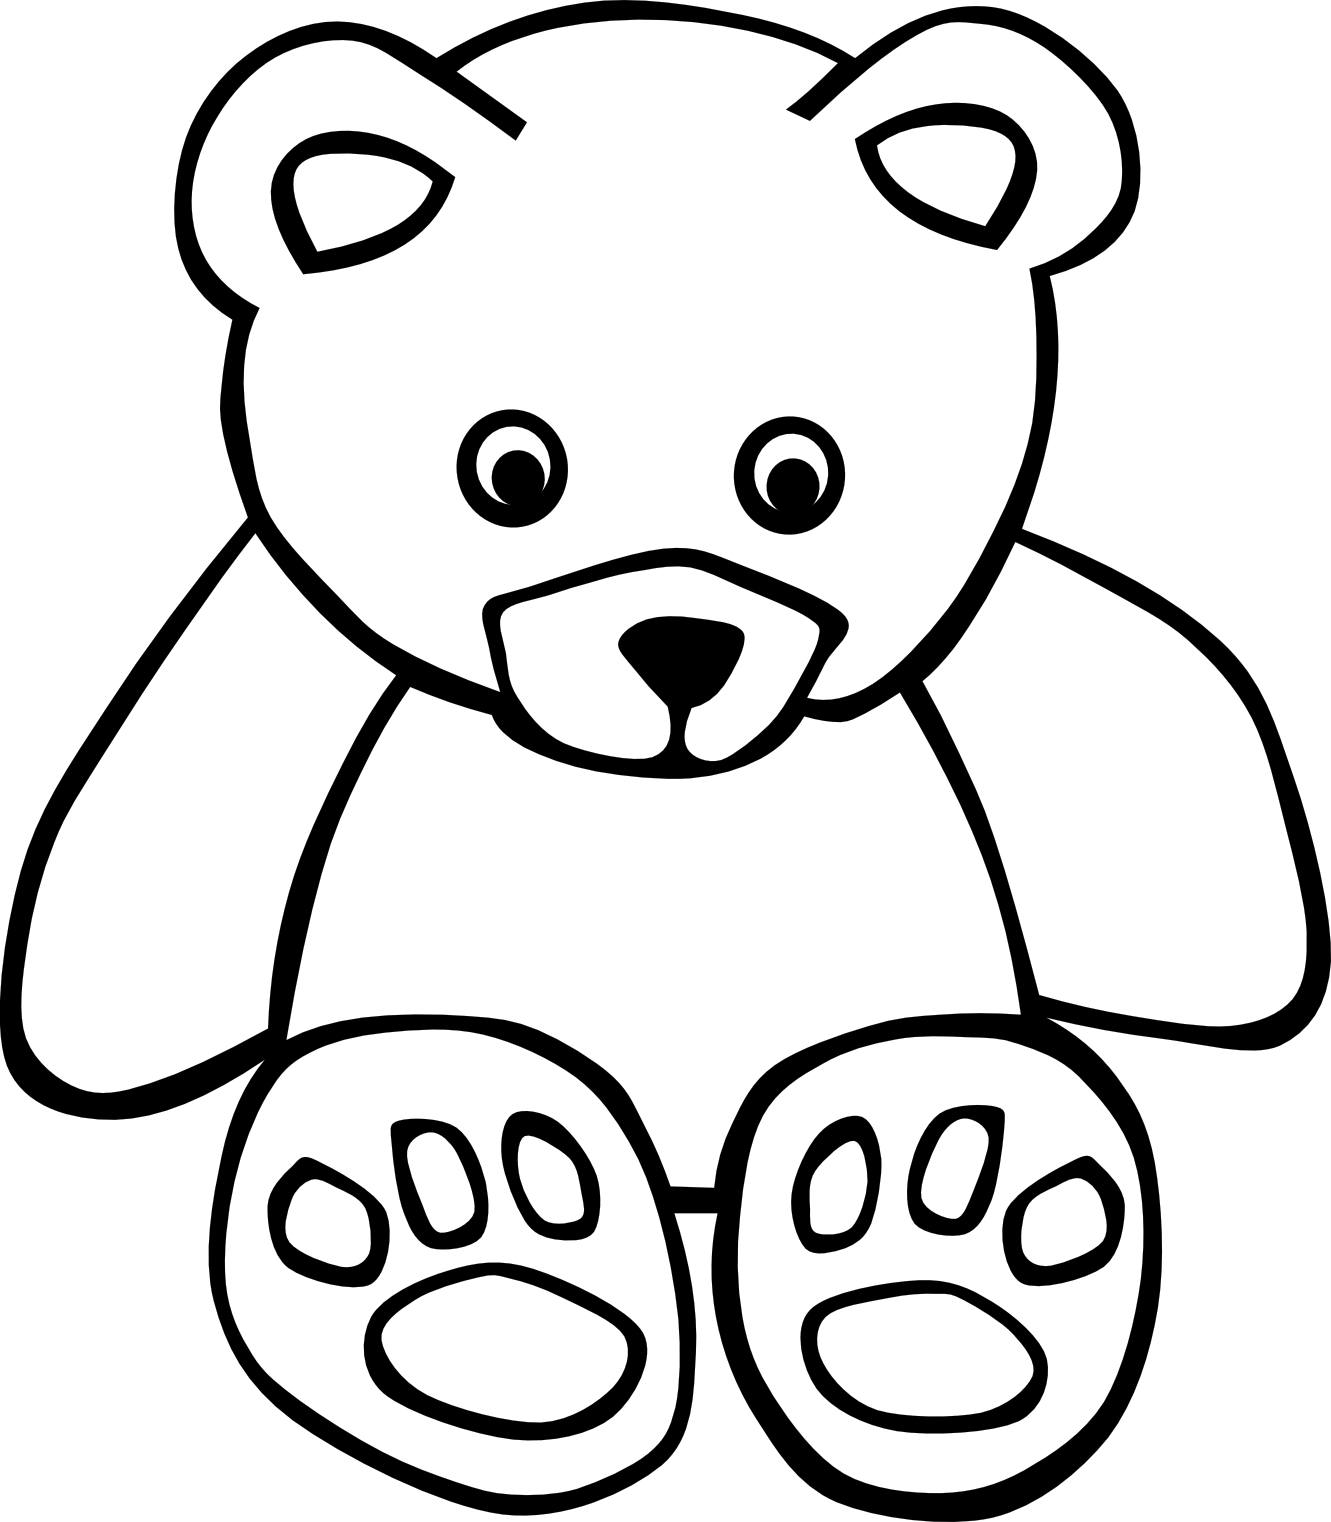 Computer Clipart Black And White   Clipart Panda   Free Clipart Images